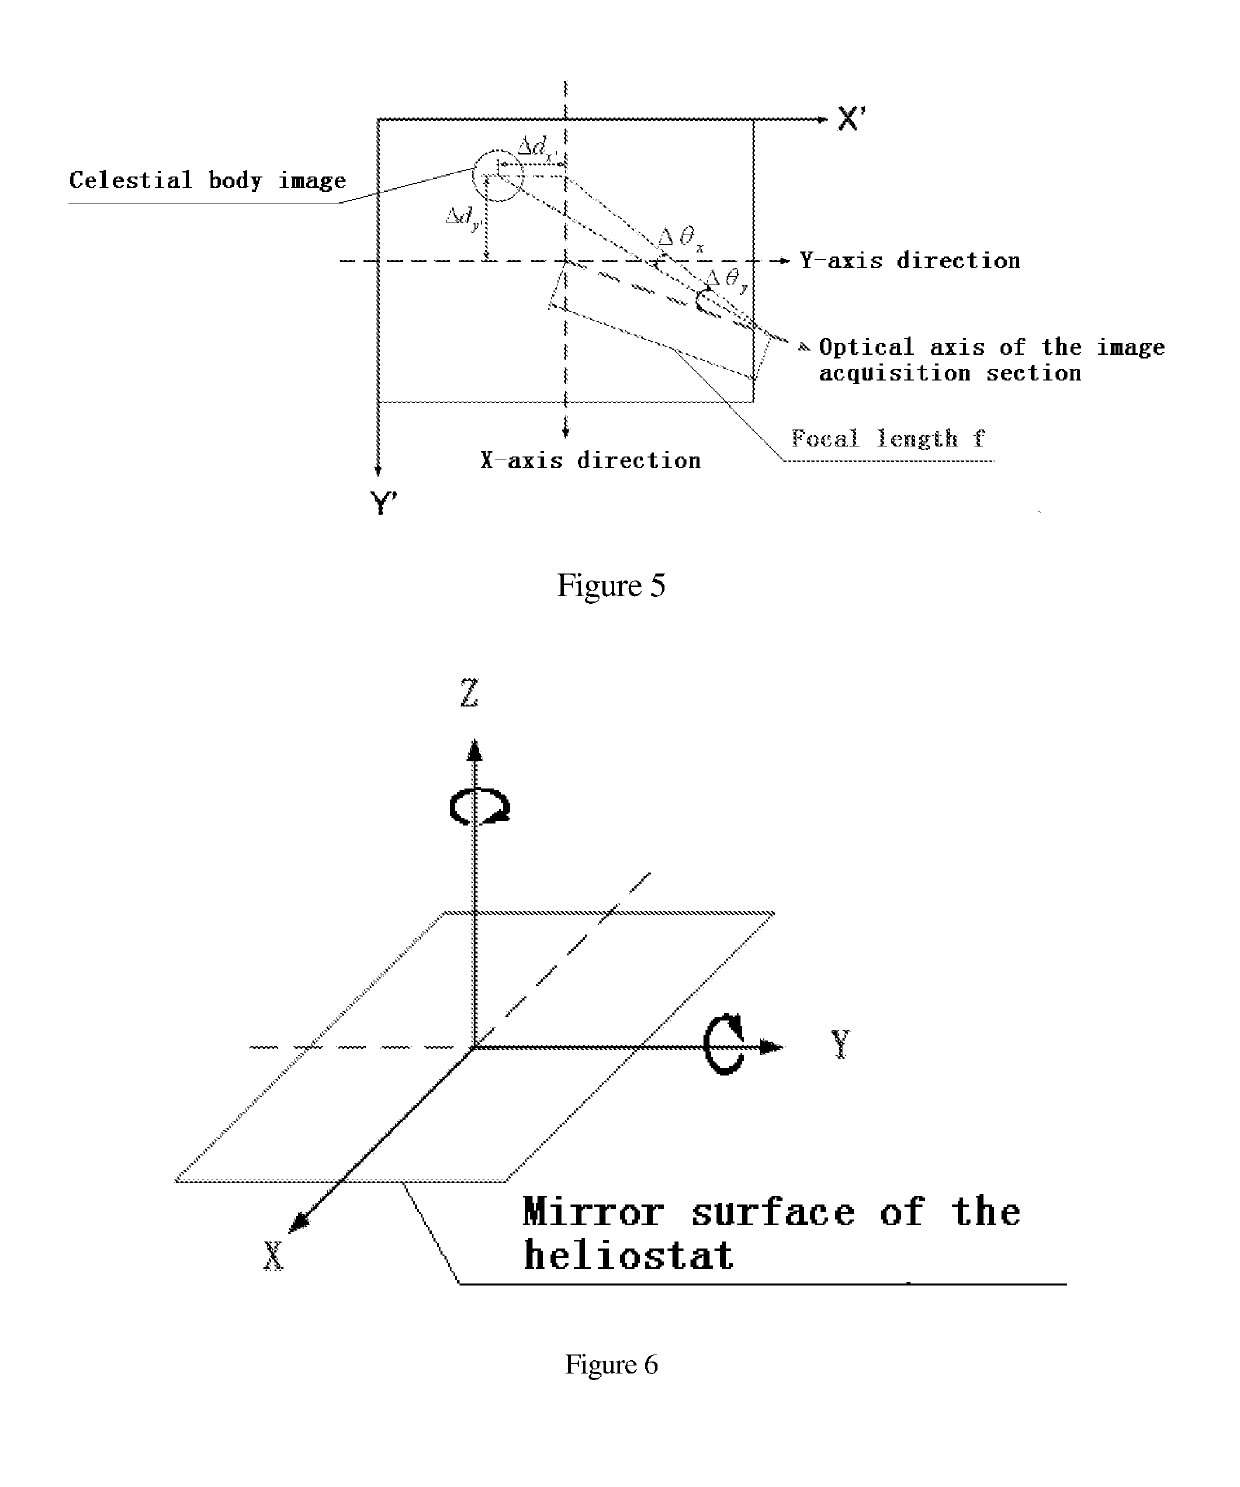 Heliostat Correction System Based on Celestial Body Images and Its Method